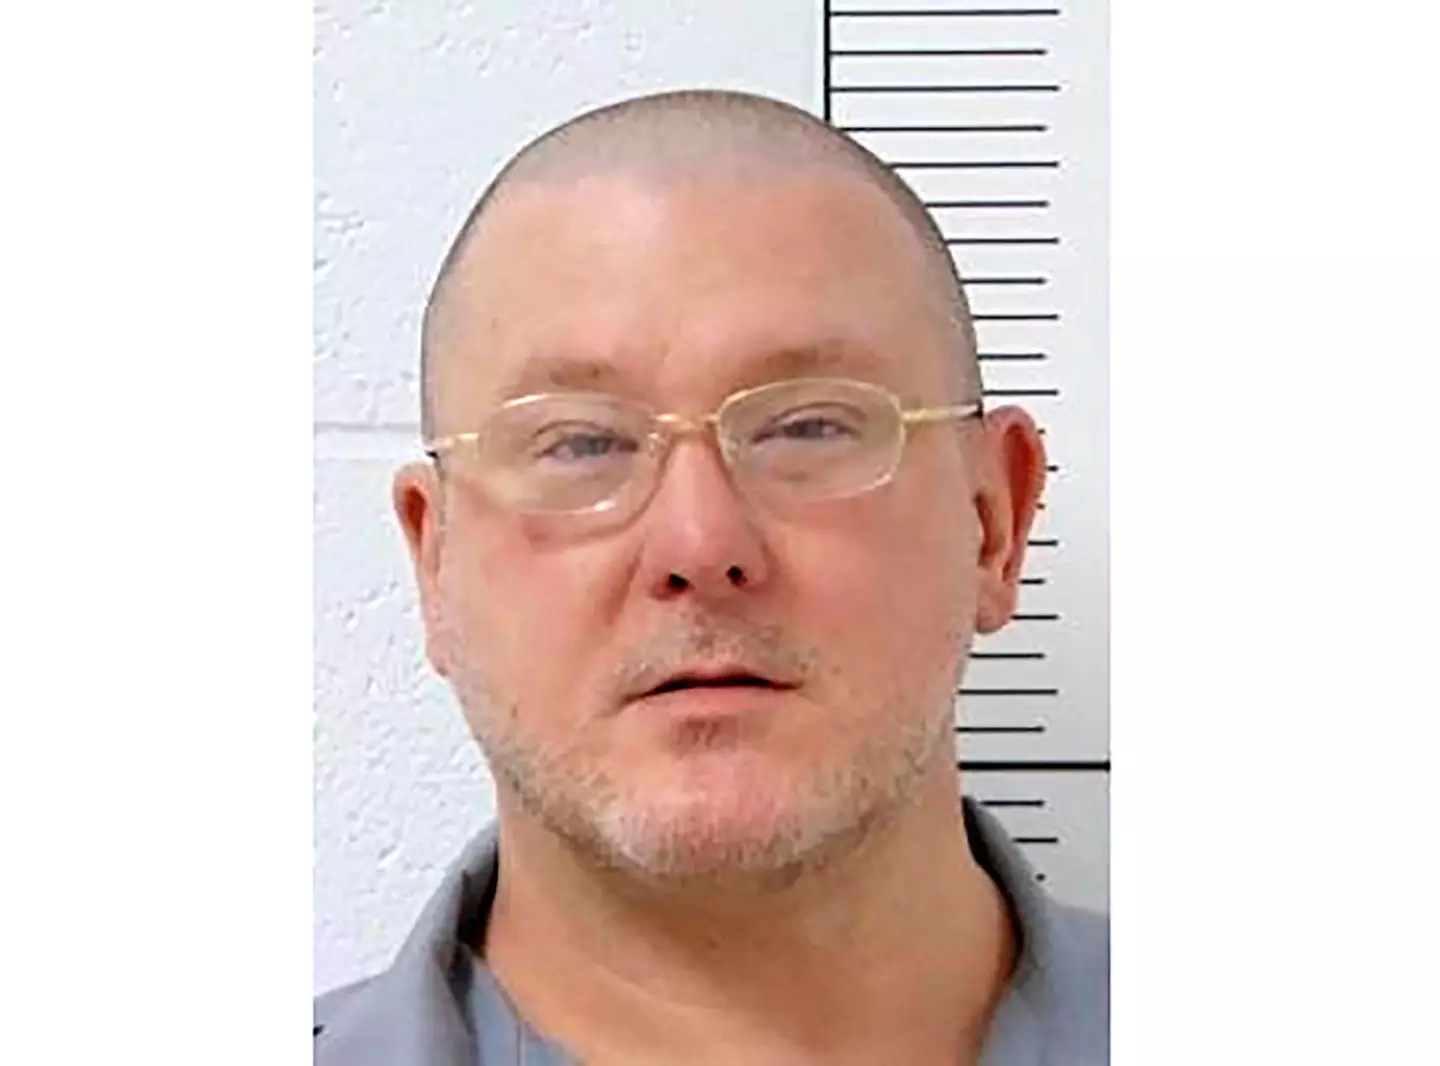 Brian Dorsey is set to be executed tomorrow. Missouri department of corrections